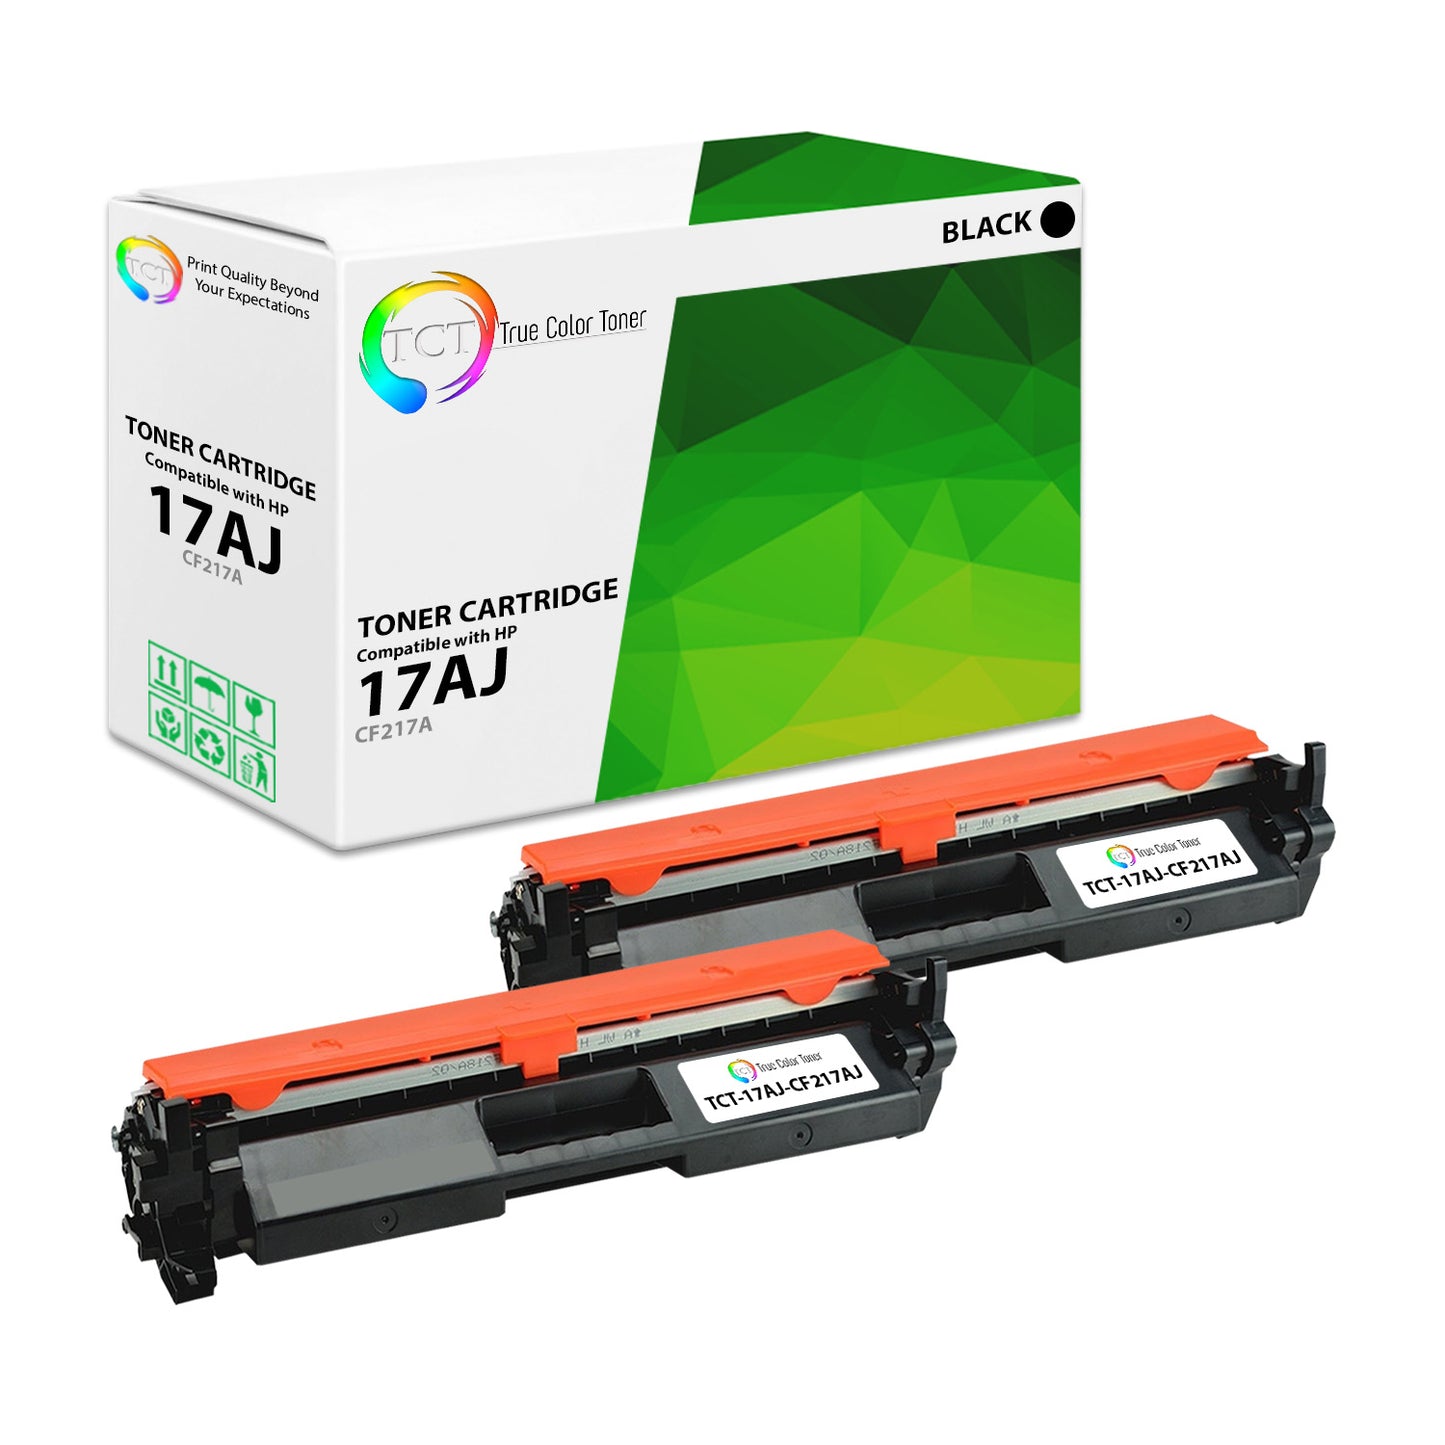 TCT Compatible Jumbo Toner Cartridge Replacement for the HP 17AJ Series - 2 Pack Black